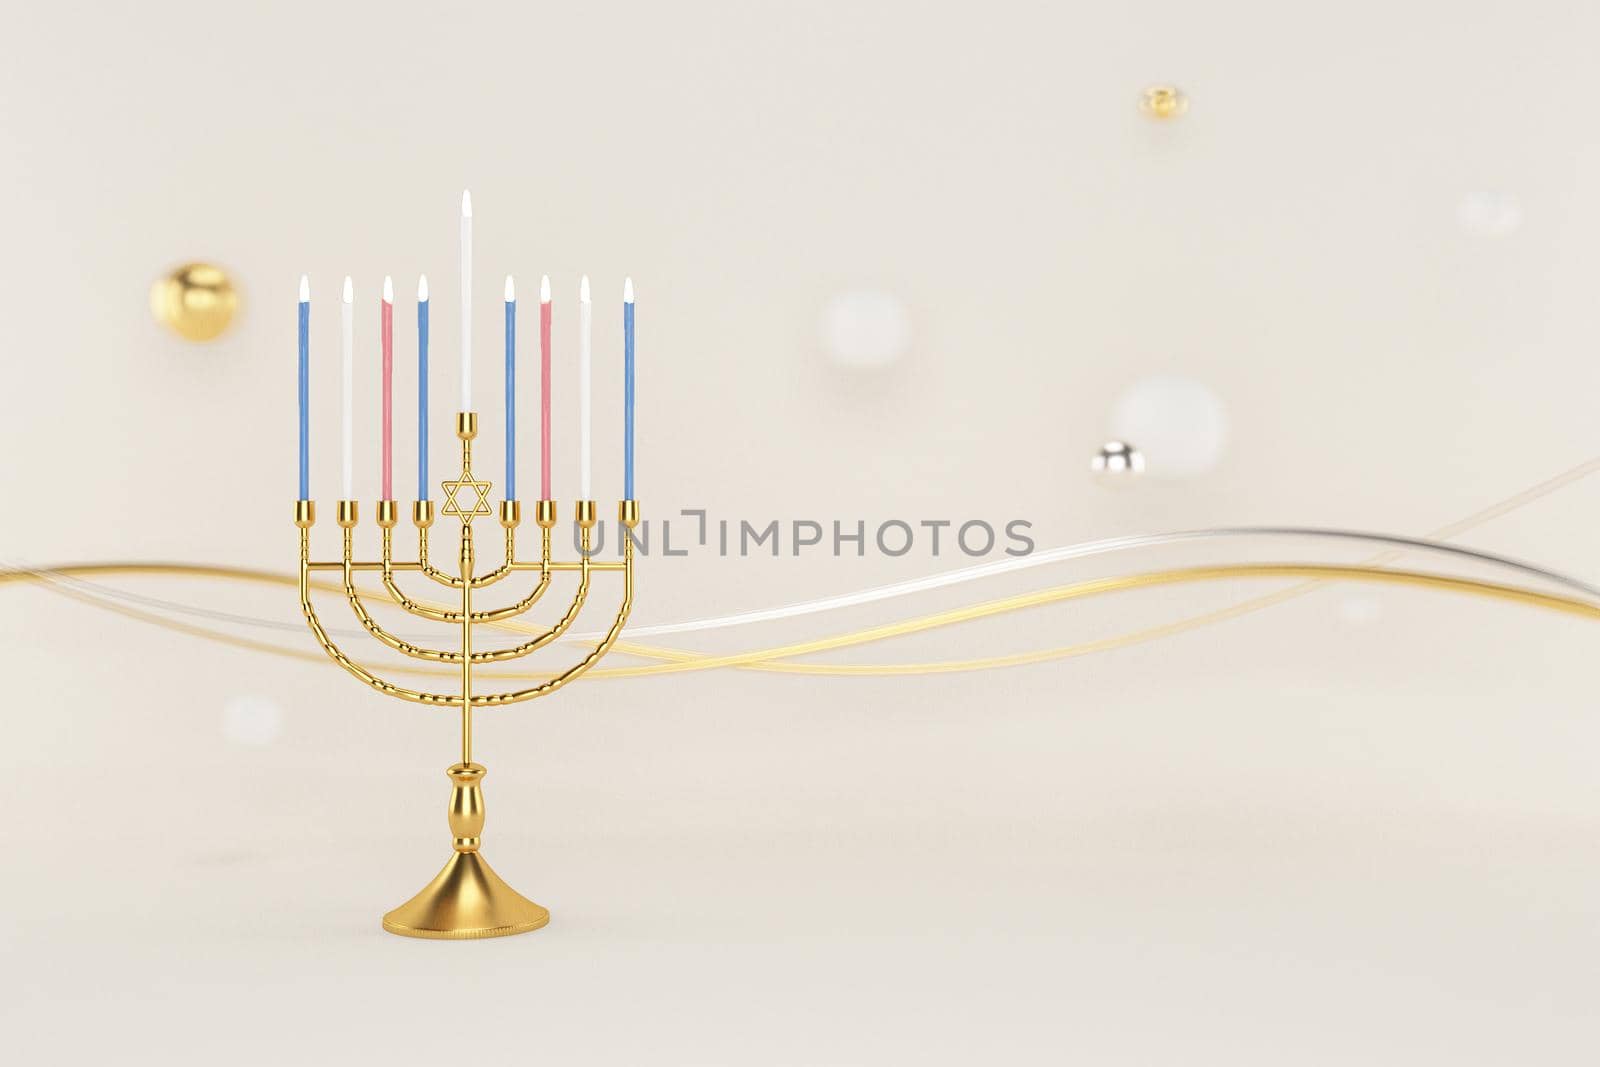 3d rendering Image of Jewish holiday Hanukkah with menorah or traditional Candelabra on a  white background.